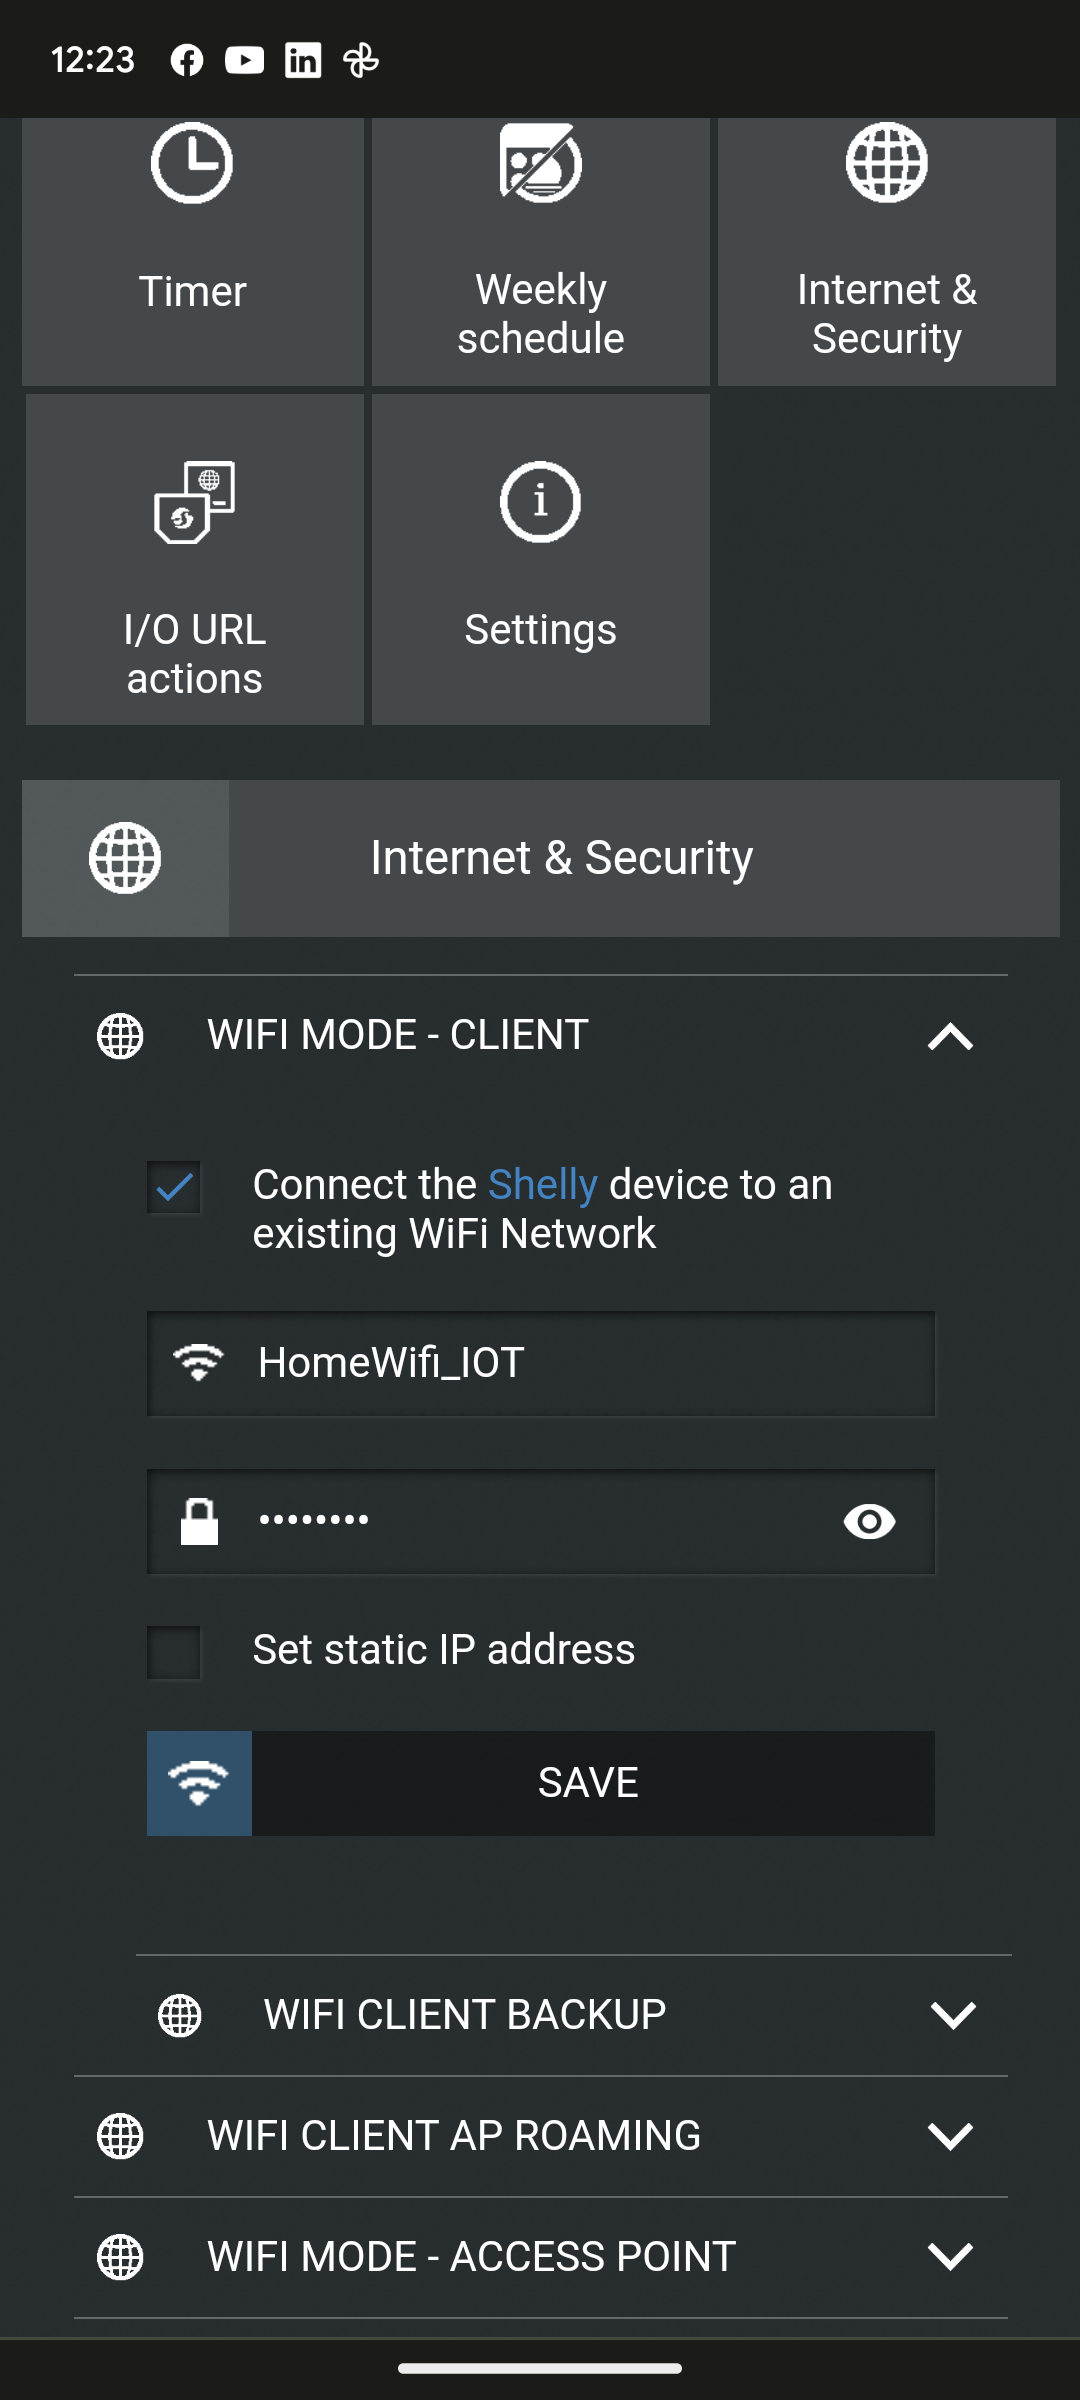 Wifi Mode - Client